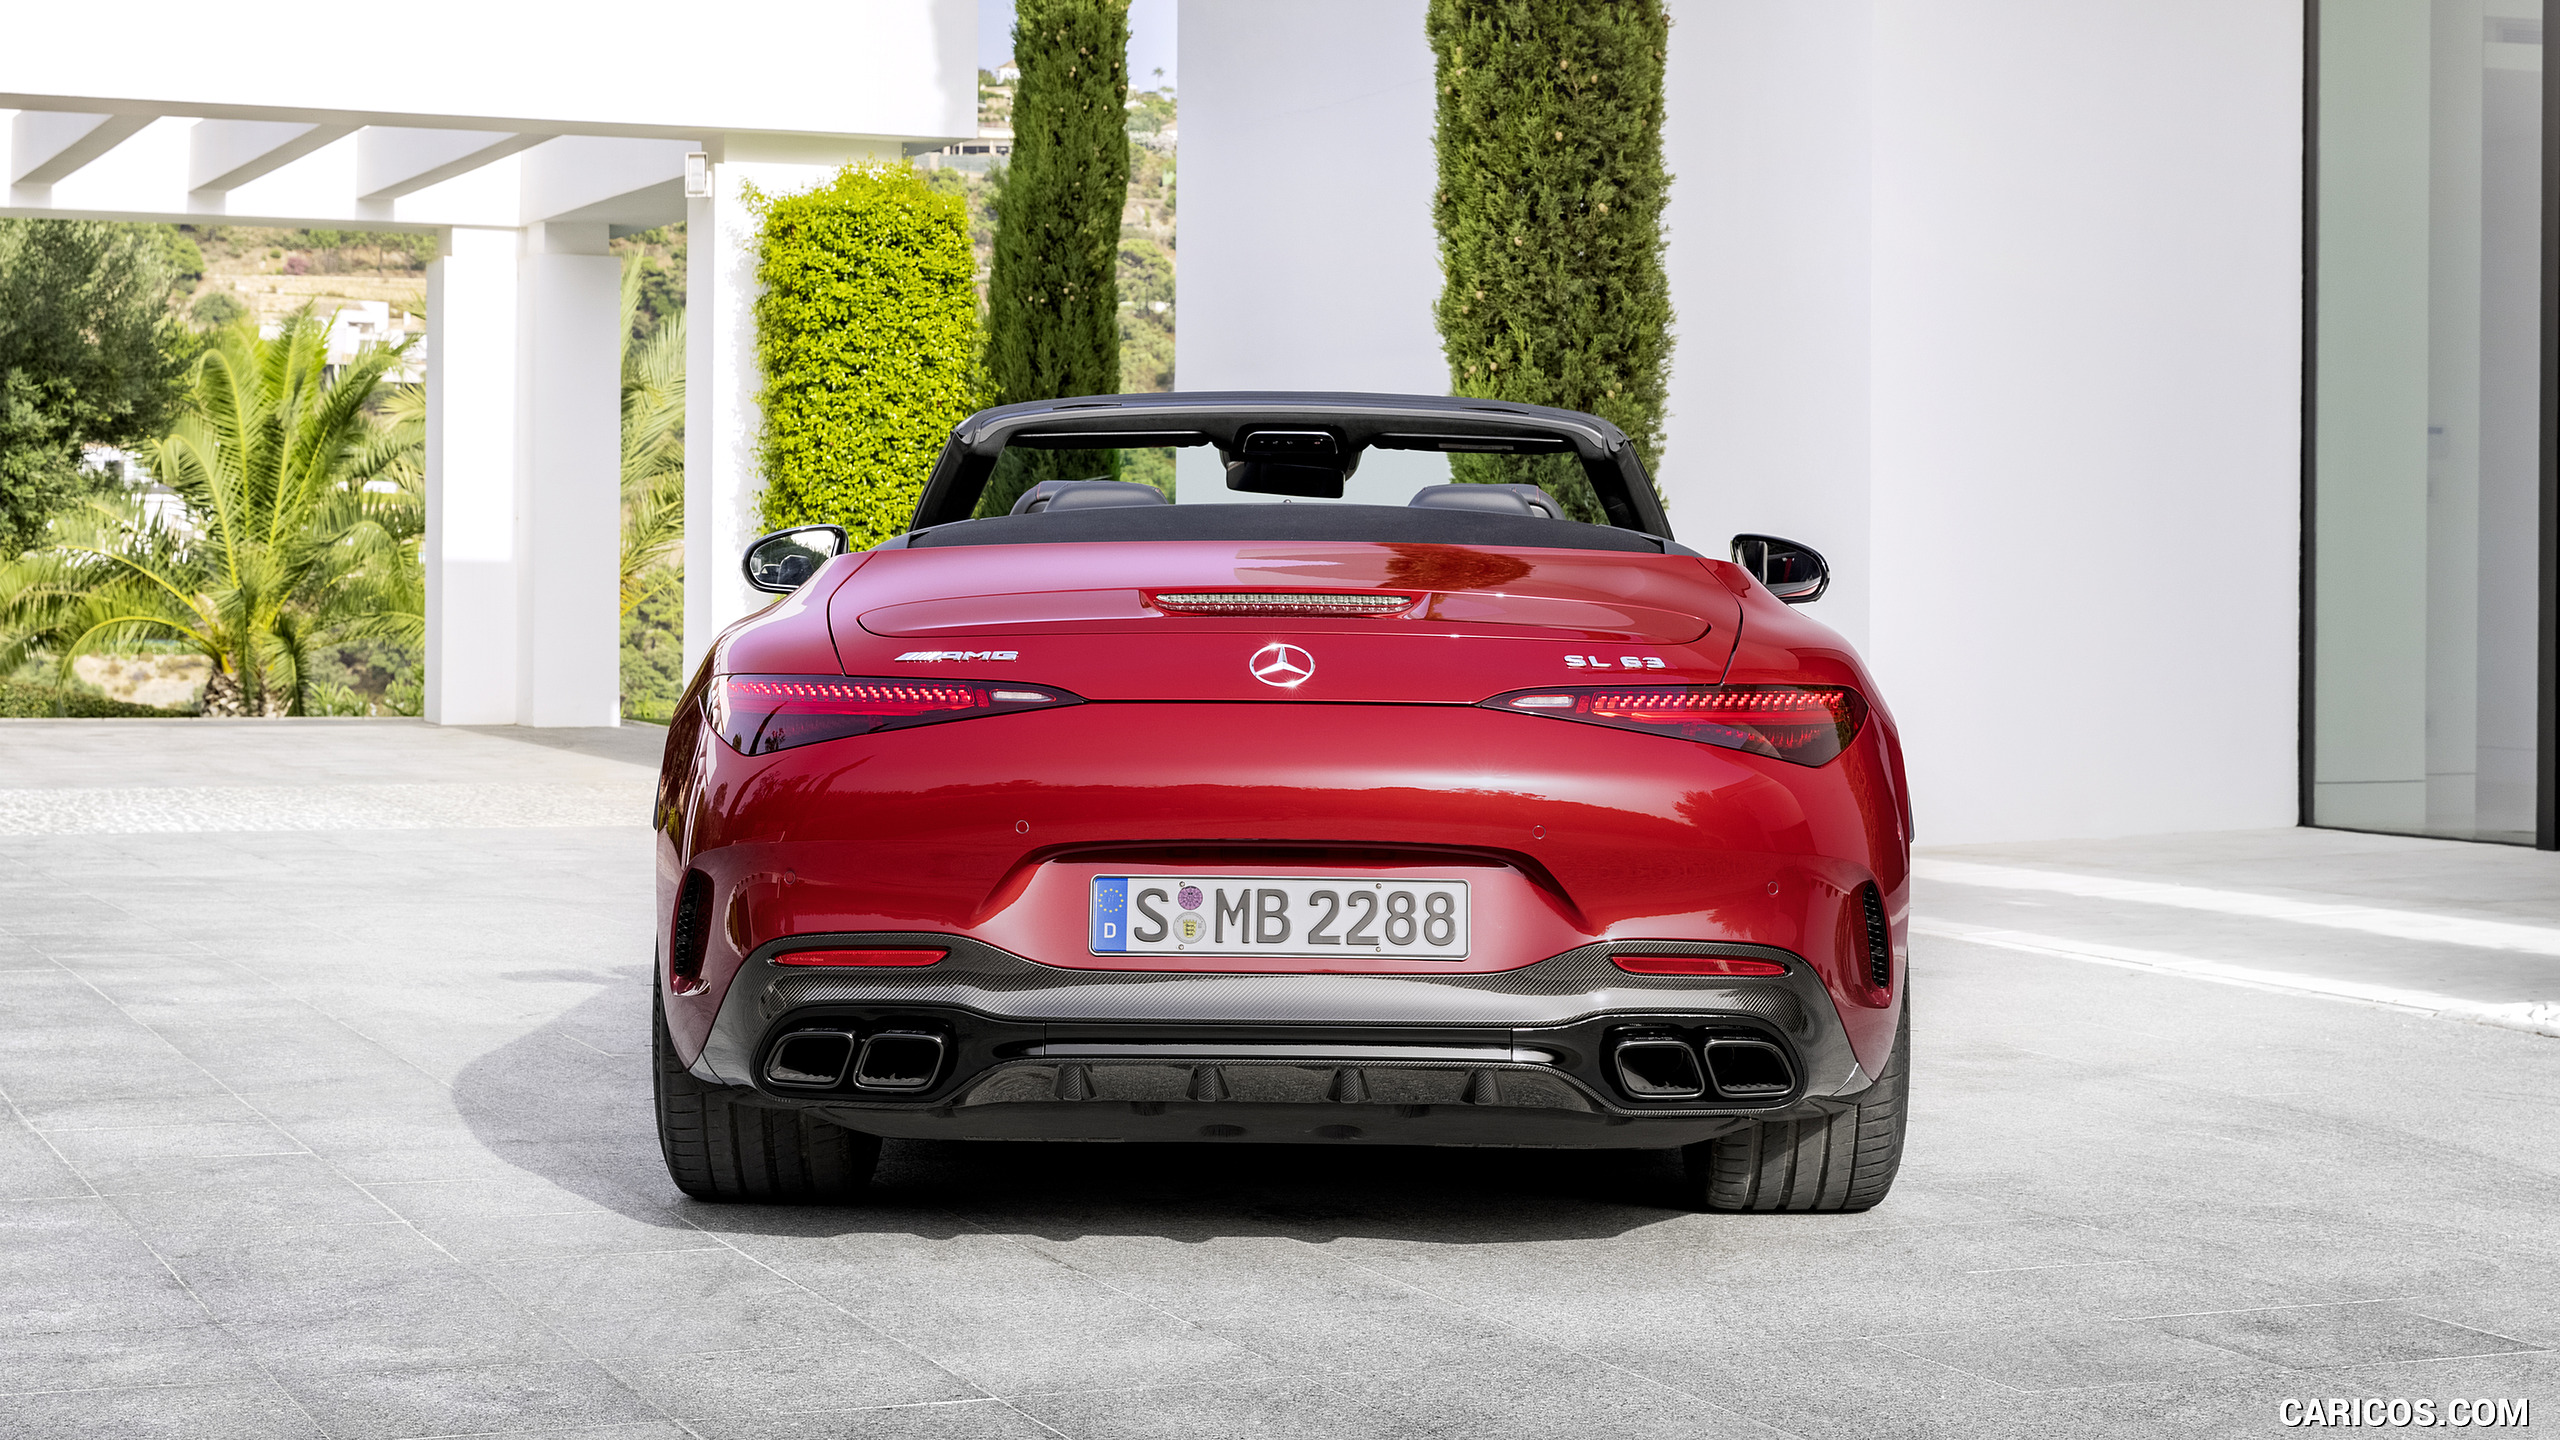 2022 Mercedes-AMG SL 63 4MATIC+ (Color: Patagonia Red Metallic) - Rear, #16 of 235